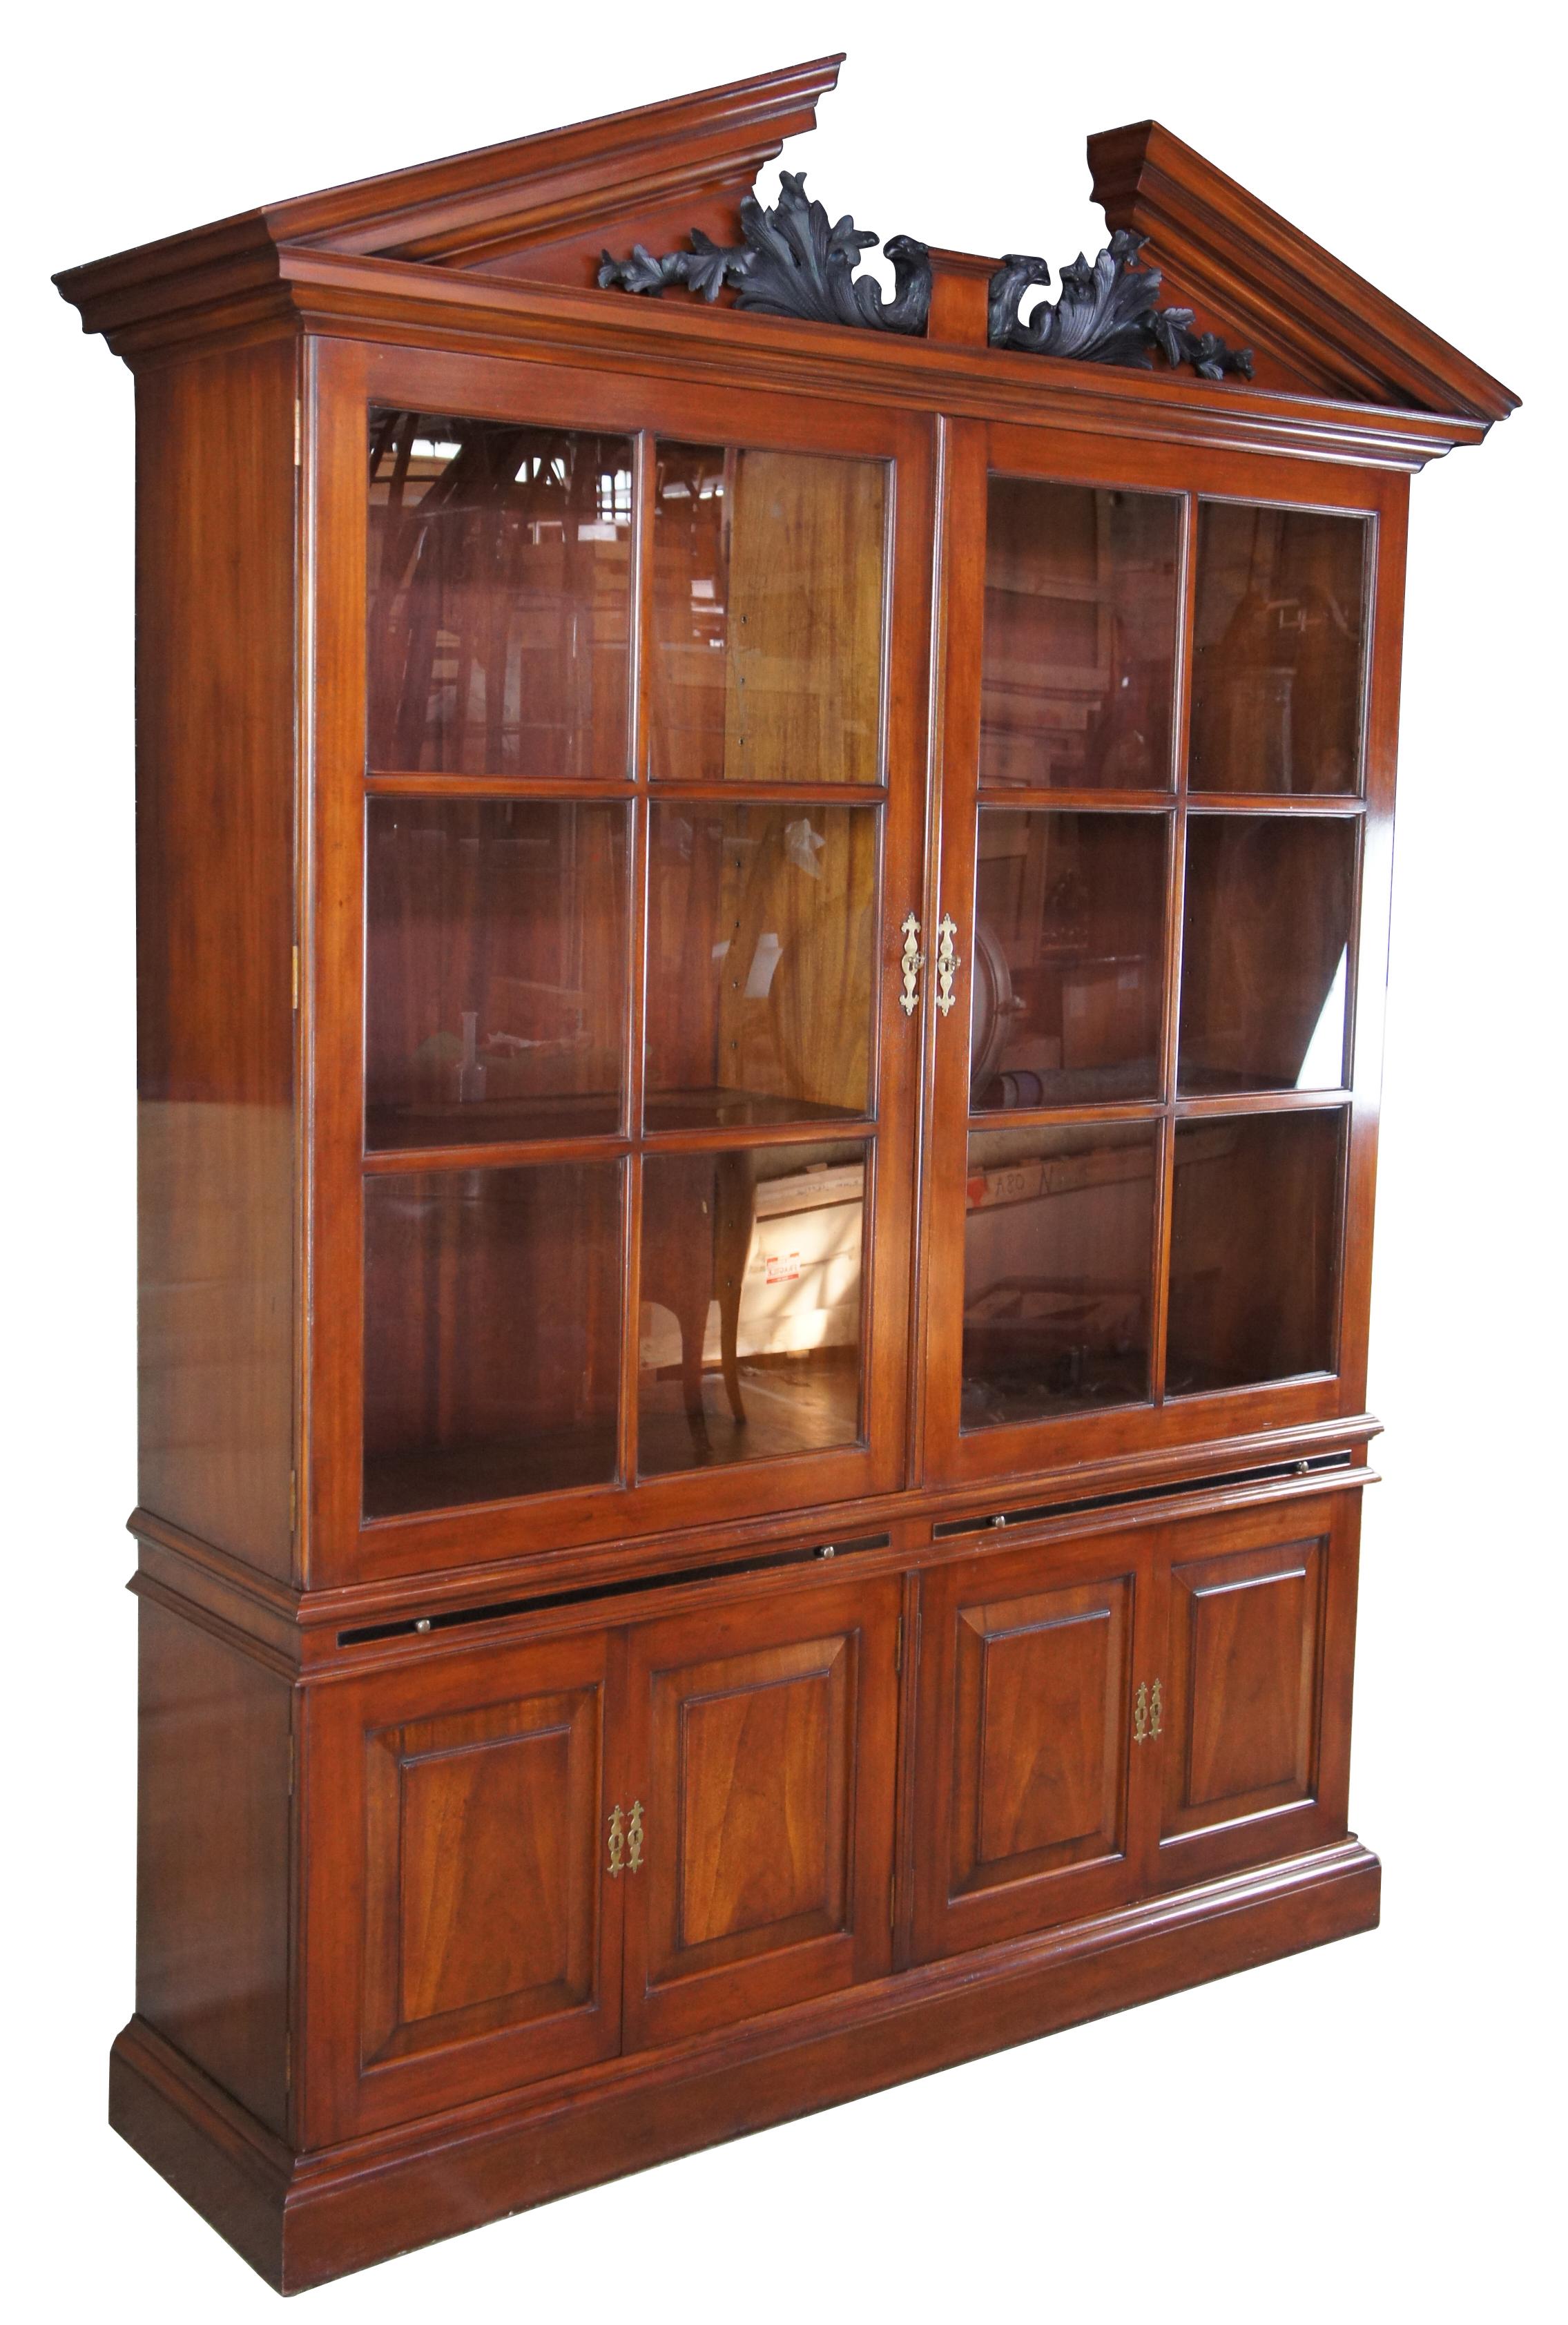 Late 20th century George II style library bookcase by Arthur Brett. Made from mahogany with a wide base featuring two six pained doors opening to adjustable shelves over pullout work surfaces and lower cabinet storage. Includes an open pediment top